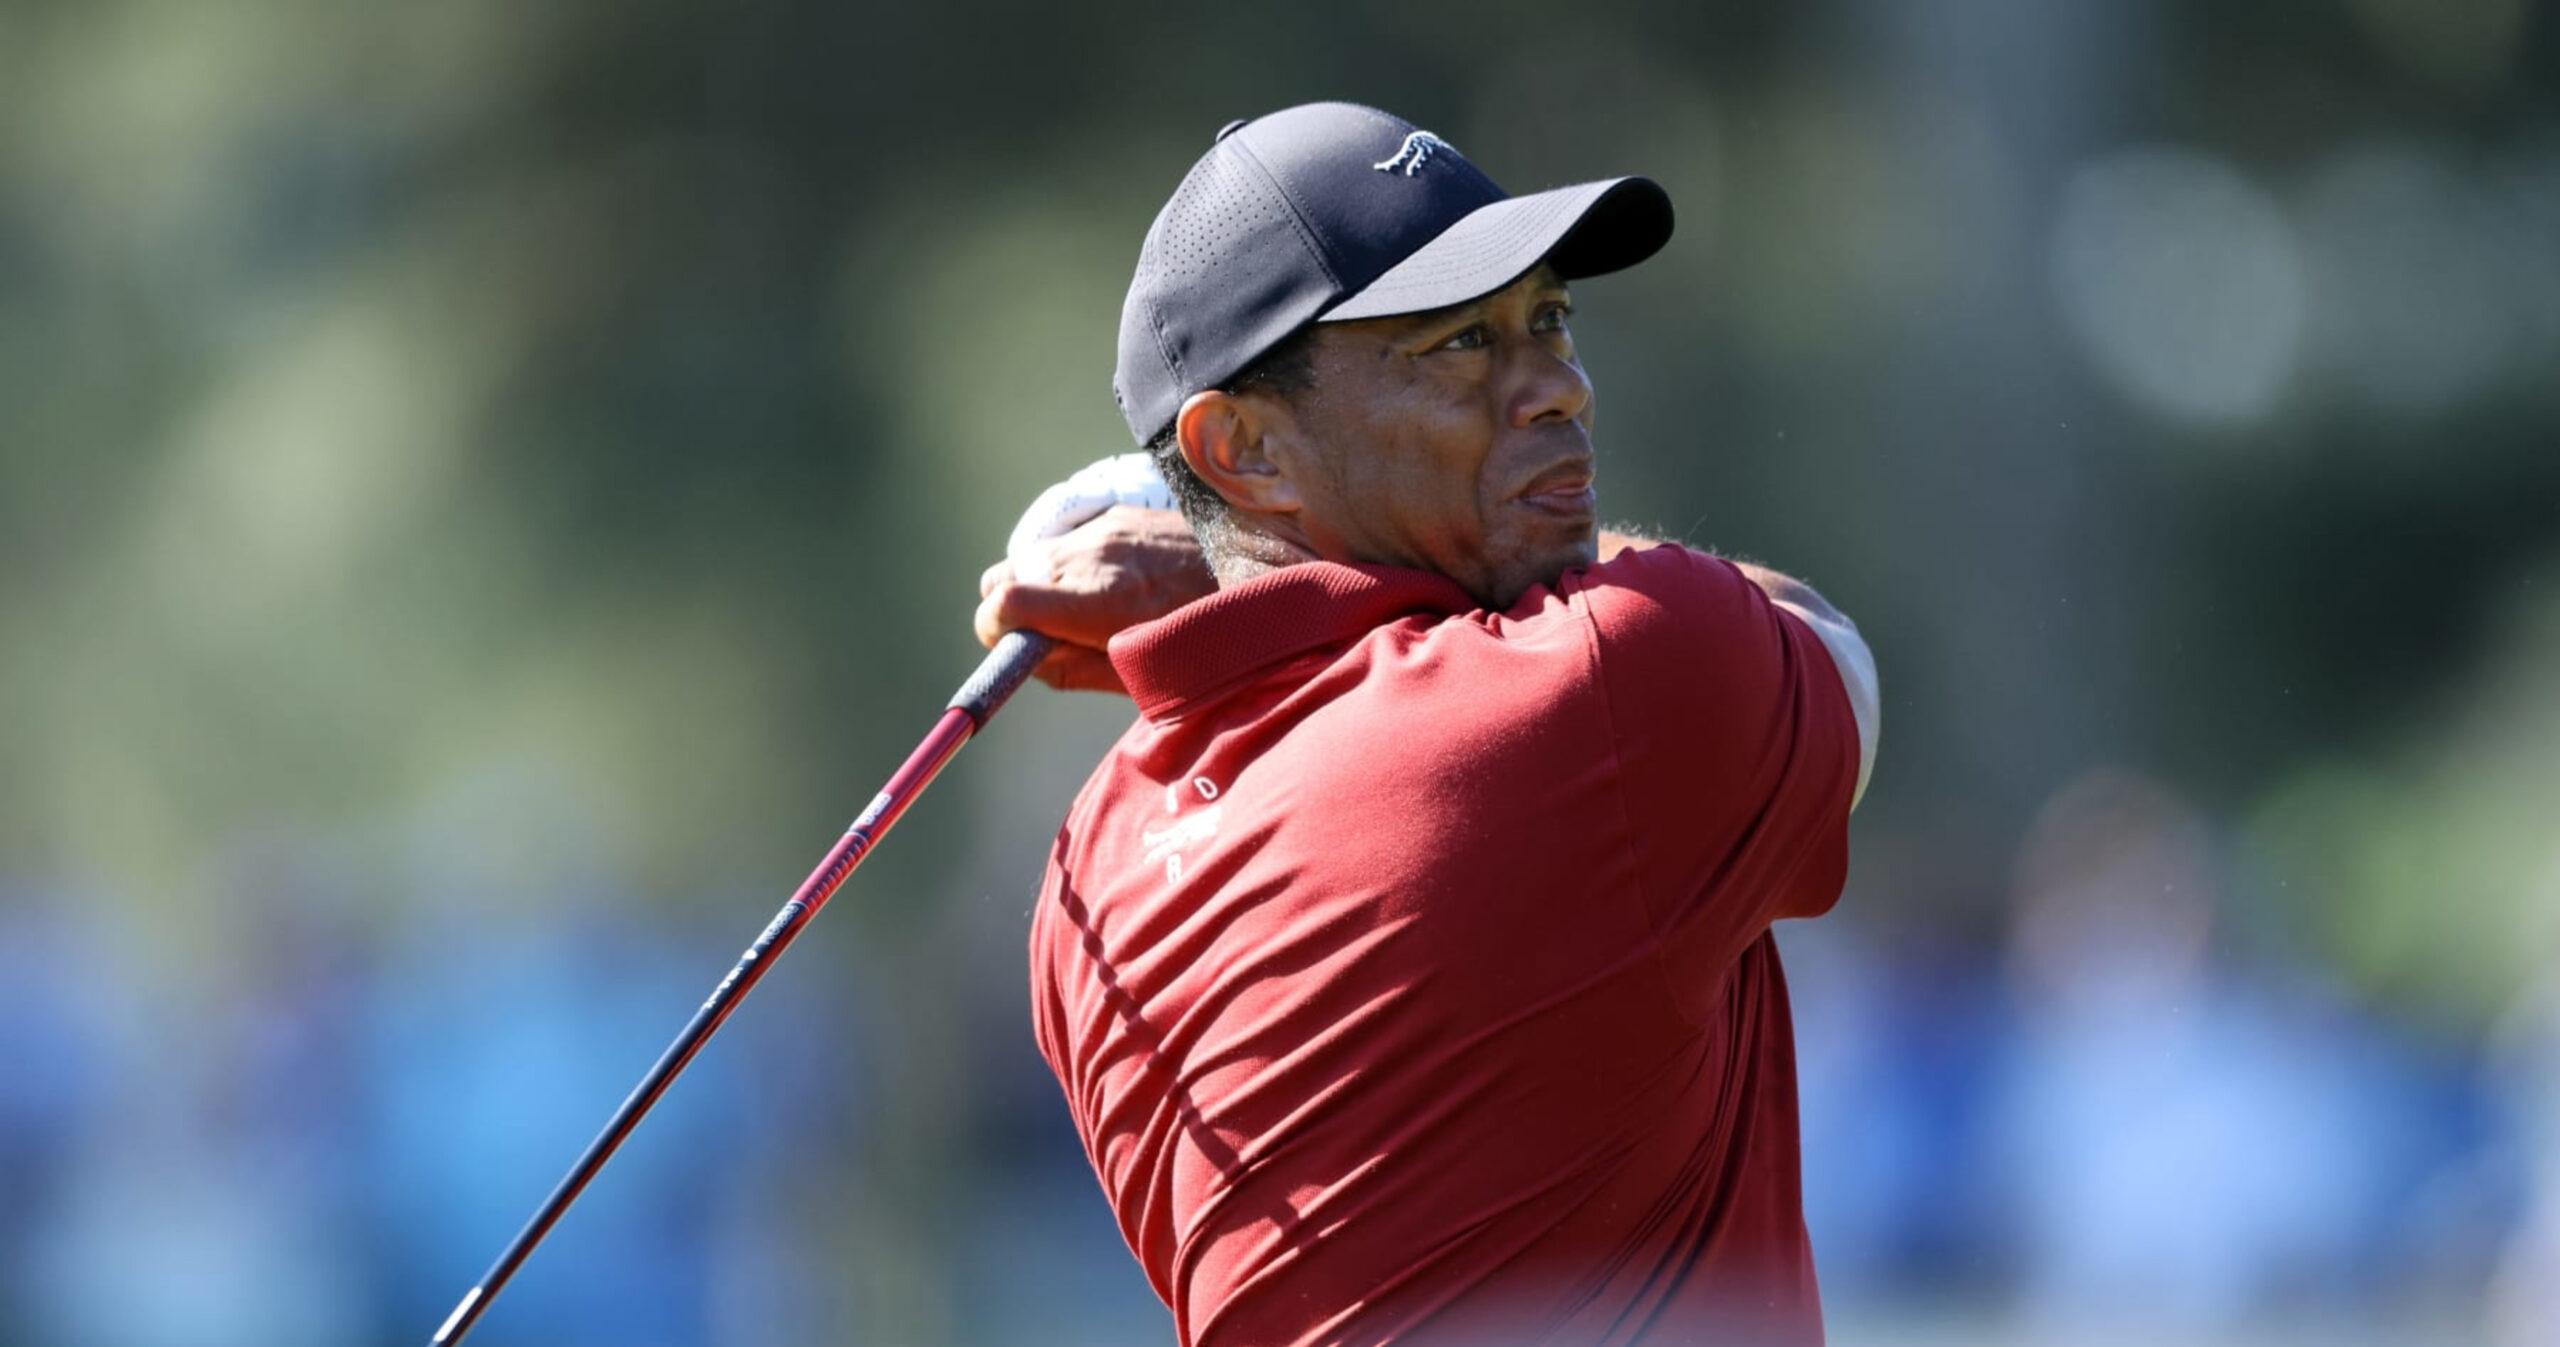 Story: Tiger Woods to Safe $100M PGA Tour Equity Payout; Rory McIlroy Could maybe Safe $50M